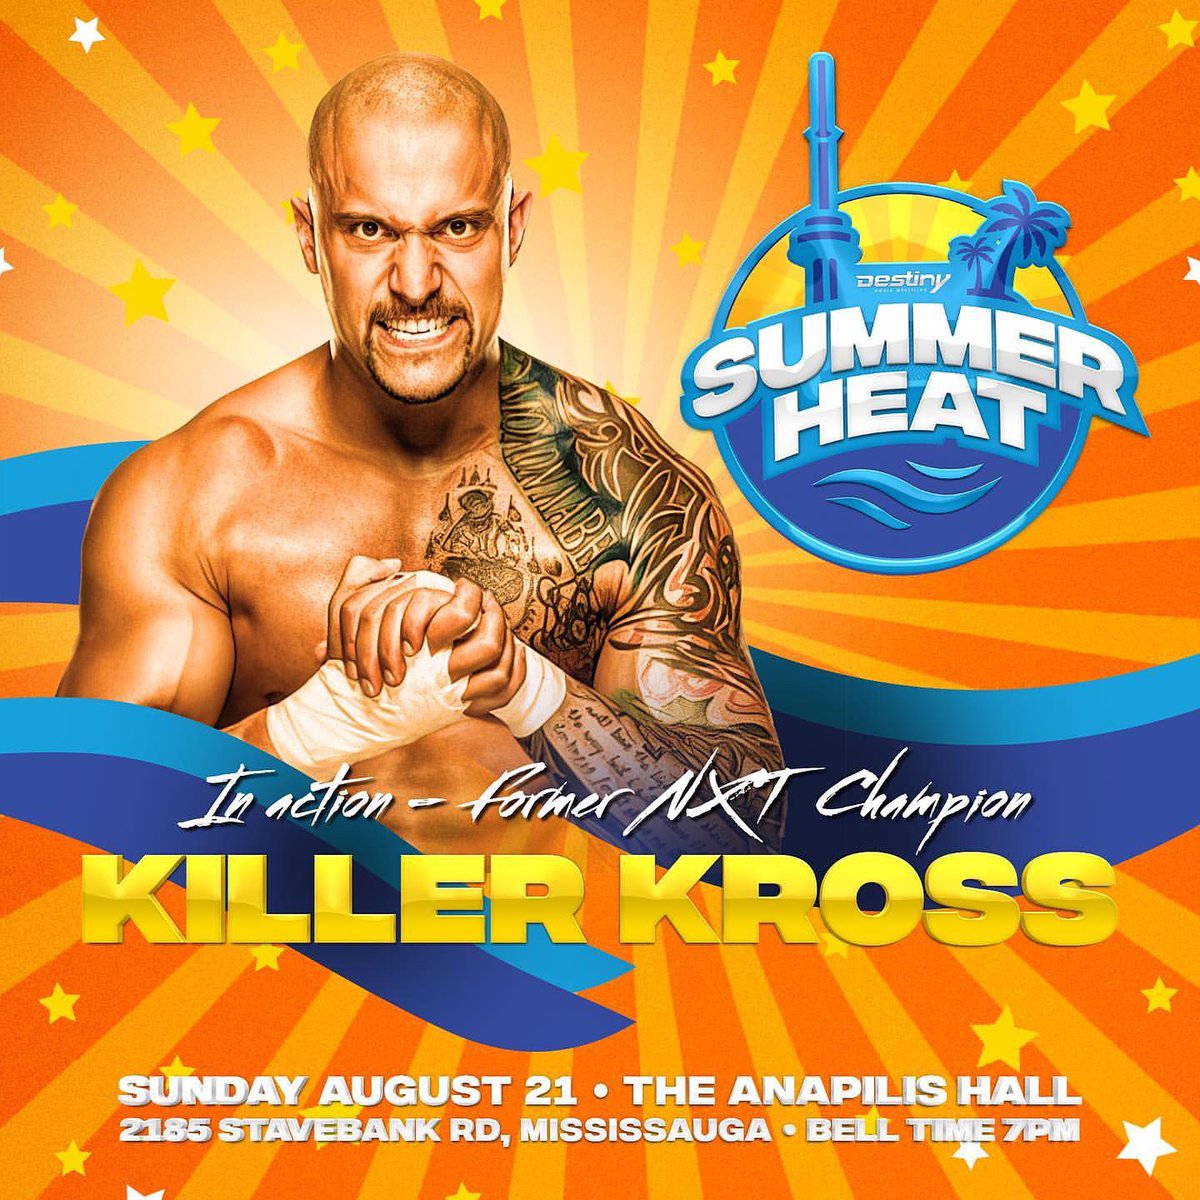 Killer Kross is a former WWE superstar and a two-time NXT World Champion. He is coming back to Destiny Wrestling for Summer Heat on August 21st☀️🌴#Destiny #DestinyWrestling #SummerHeat